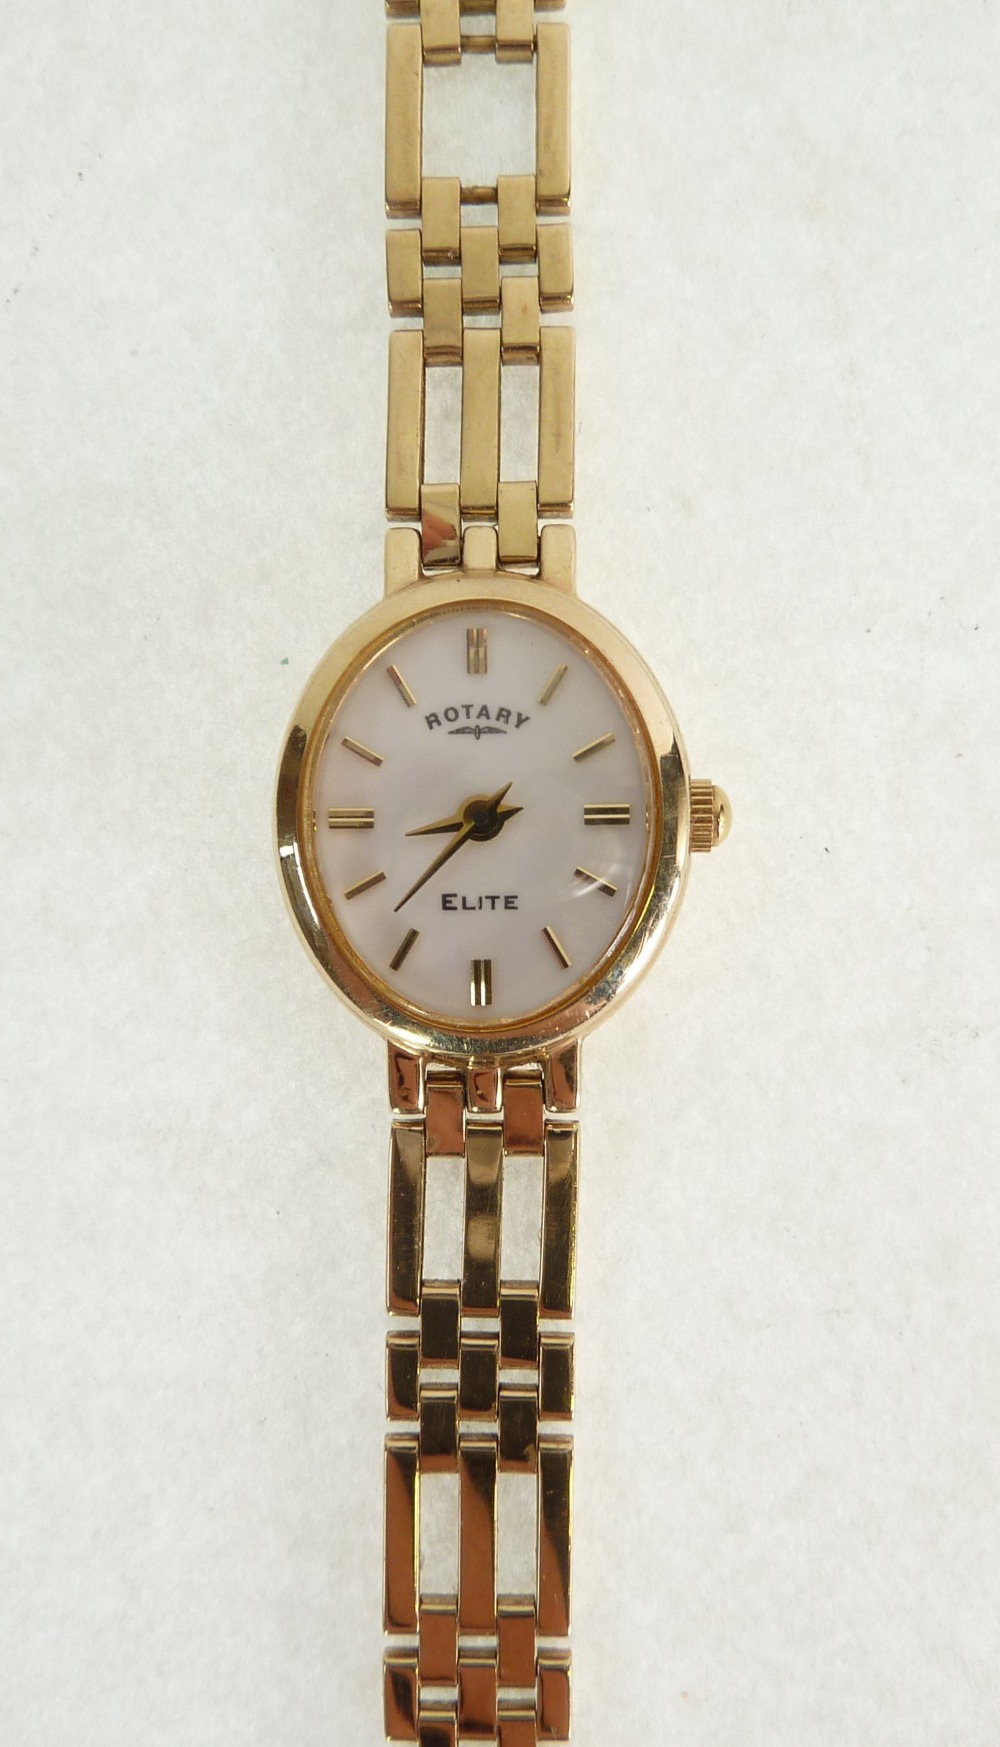 LADY`S ROTARY `ELITE` 9CT GOLD WRIST WATCH, the white oval dial with batons, WITH 9CT GOLD